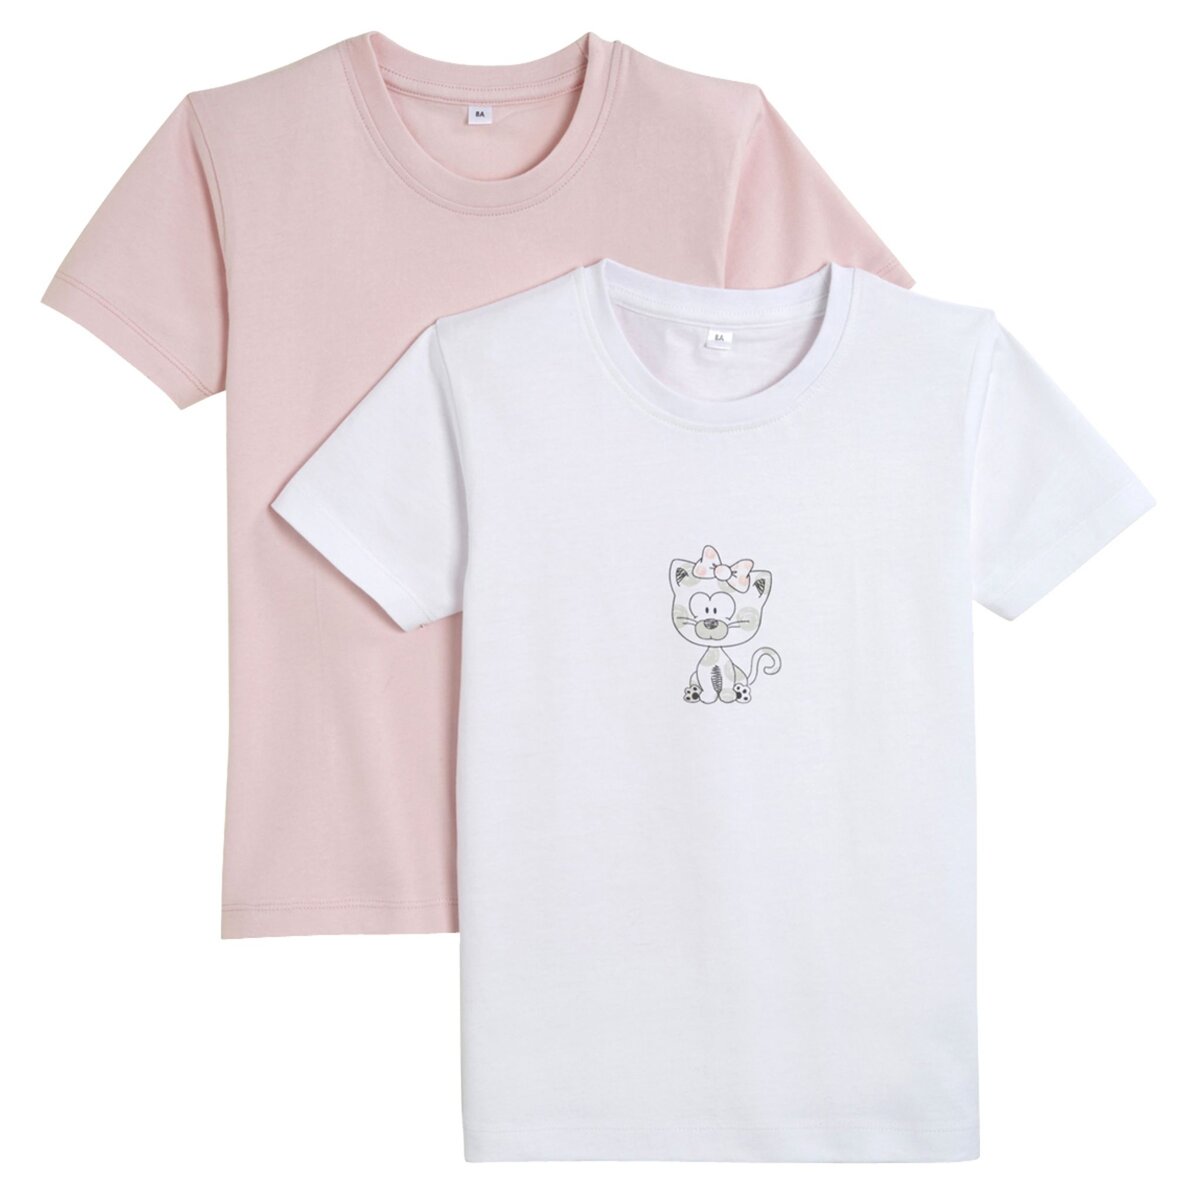 IN EXTENSO Lot de 2 tee-shirt Manches courtes "Chat" Fille